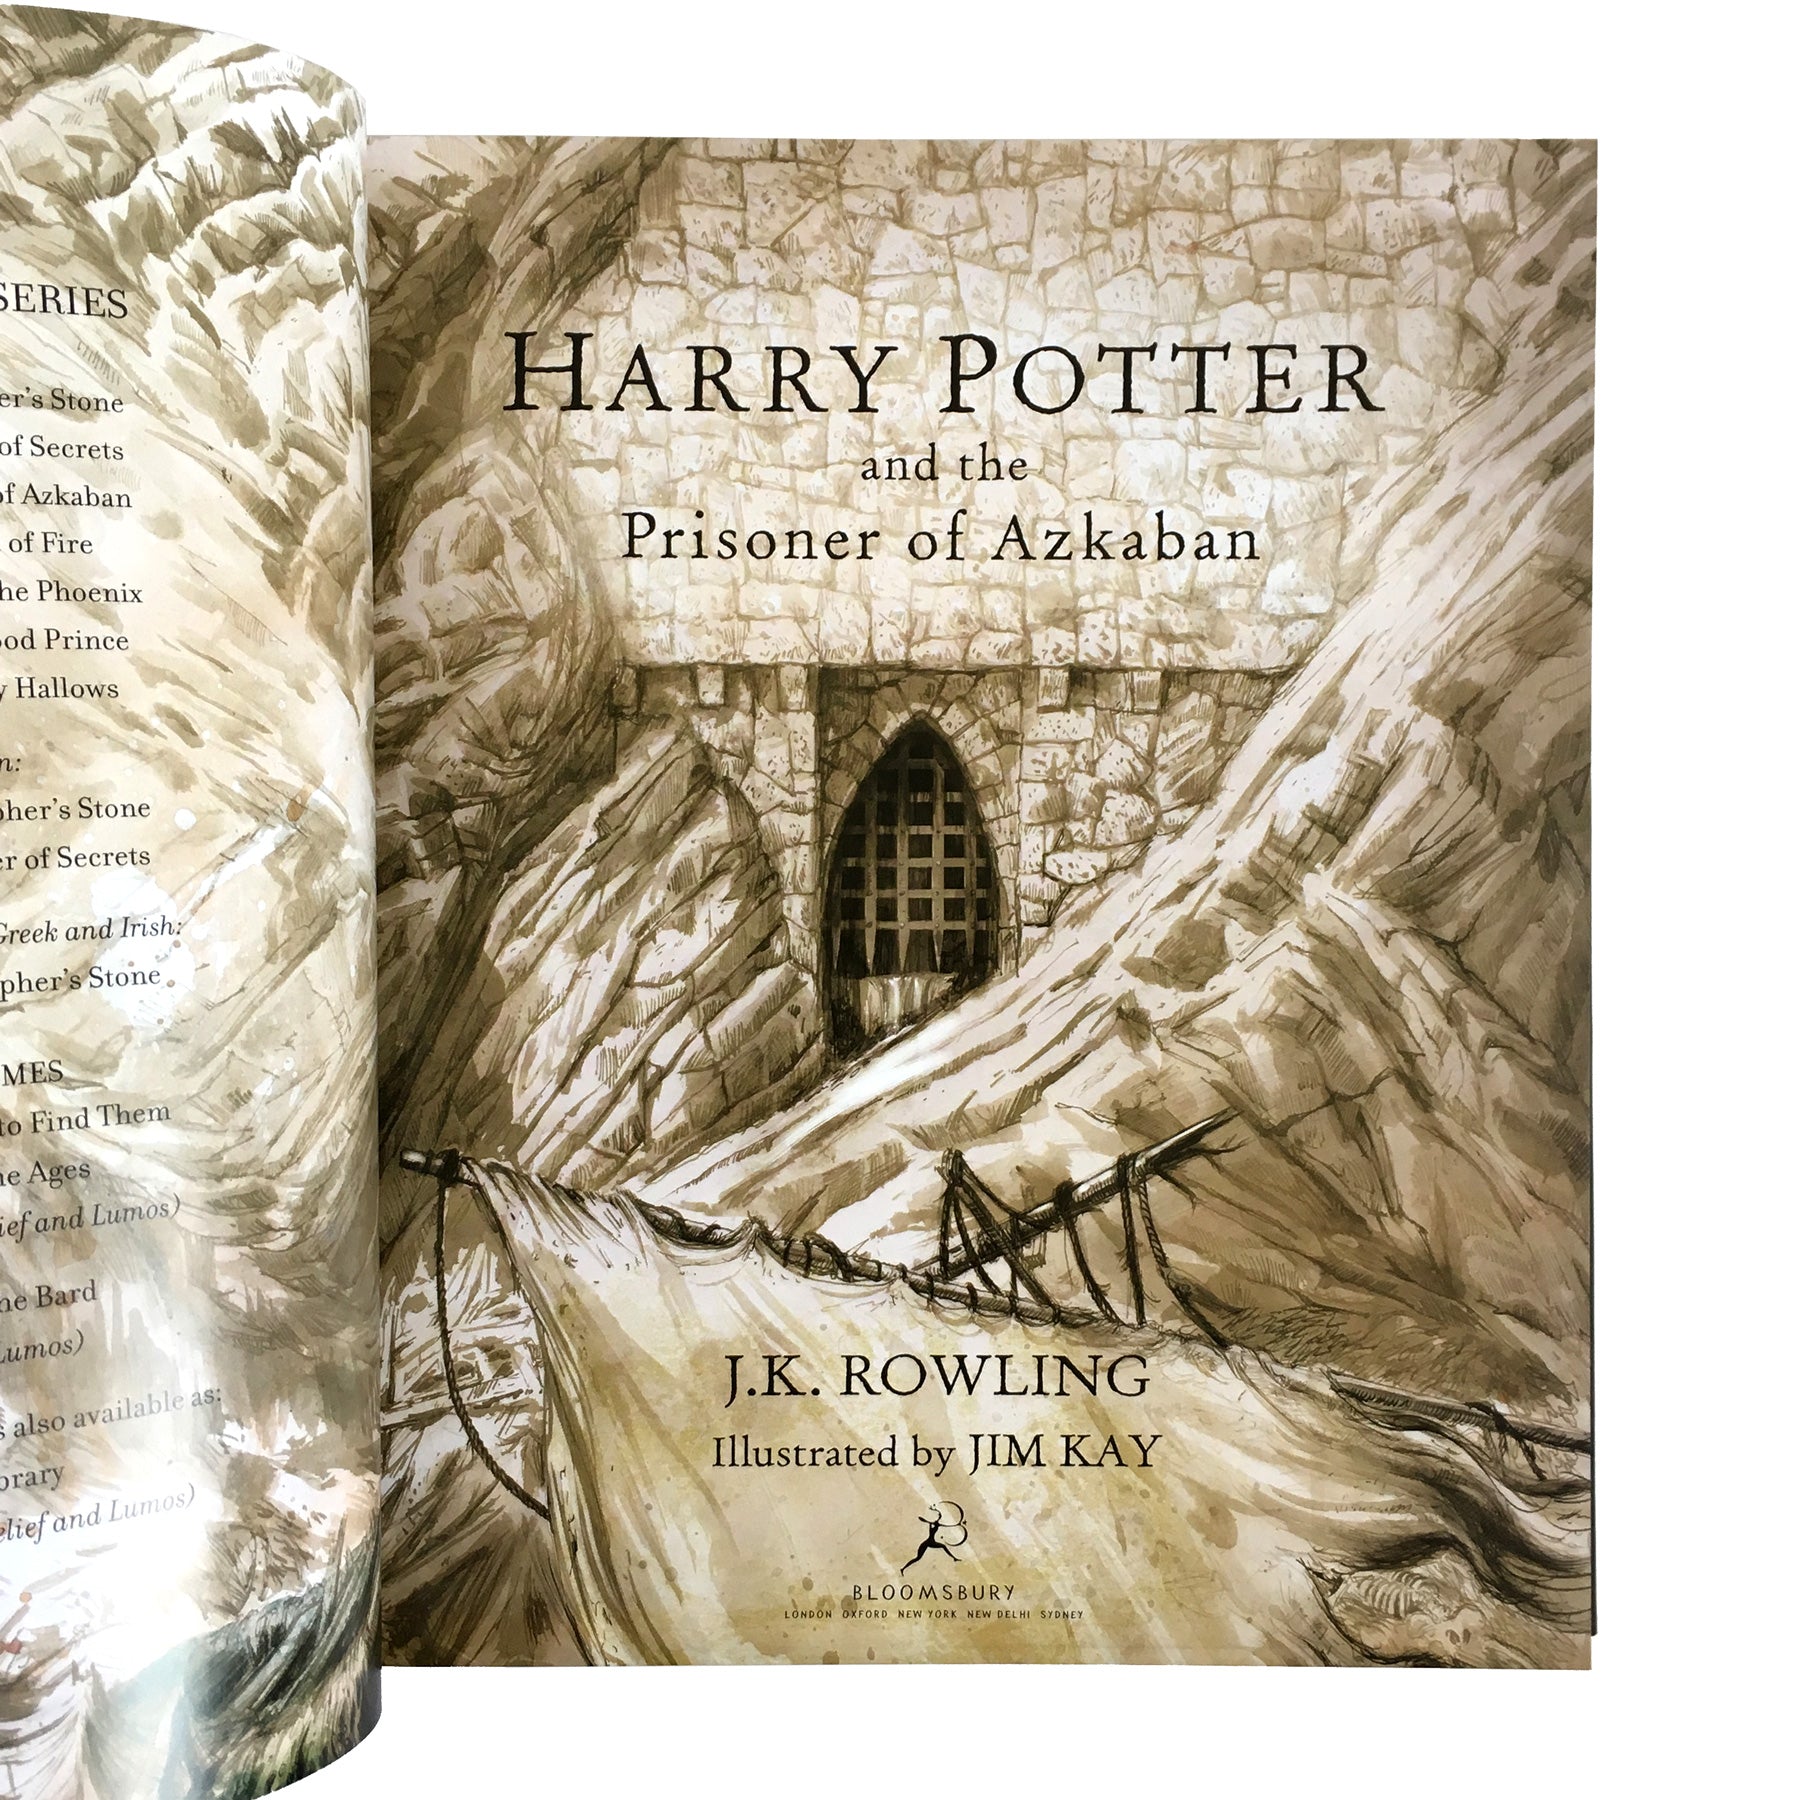 Harry Potter and the Prisoner of Azkaban Illustrated Edition